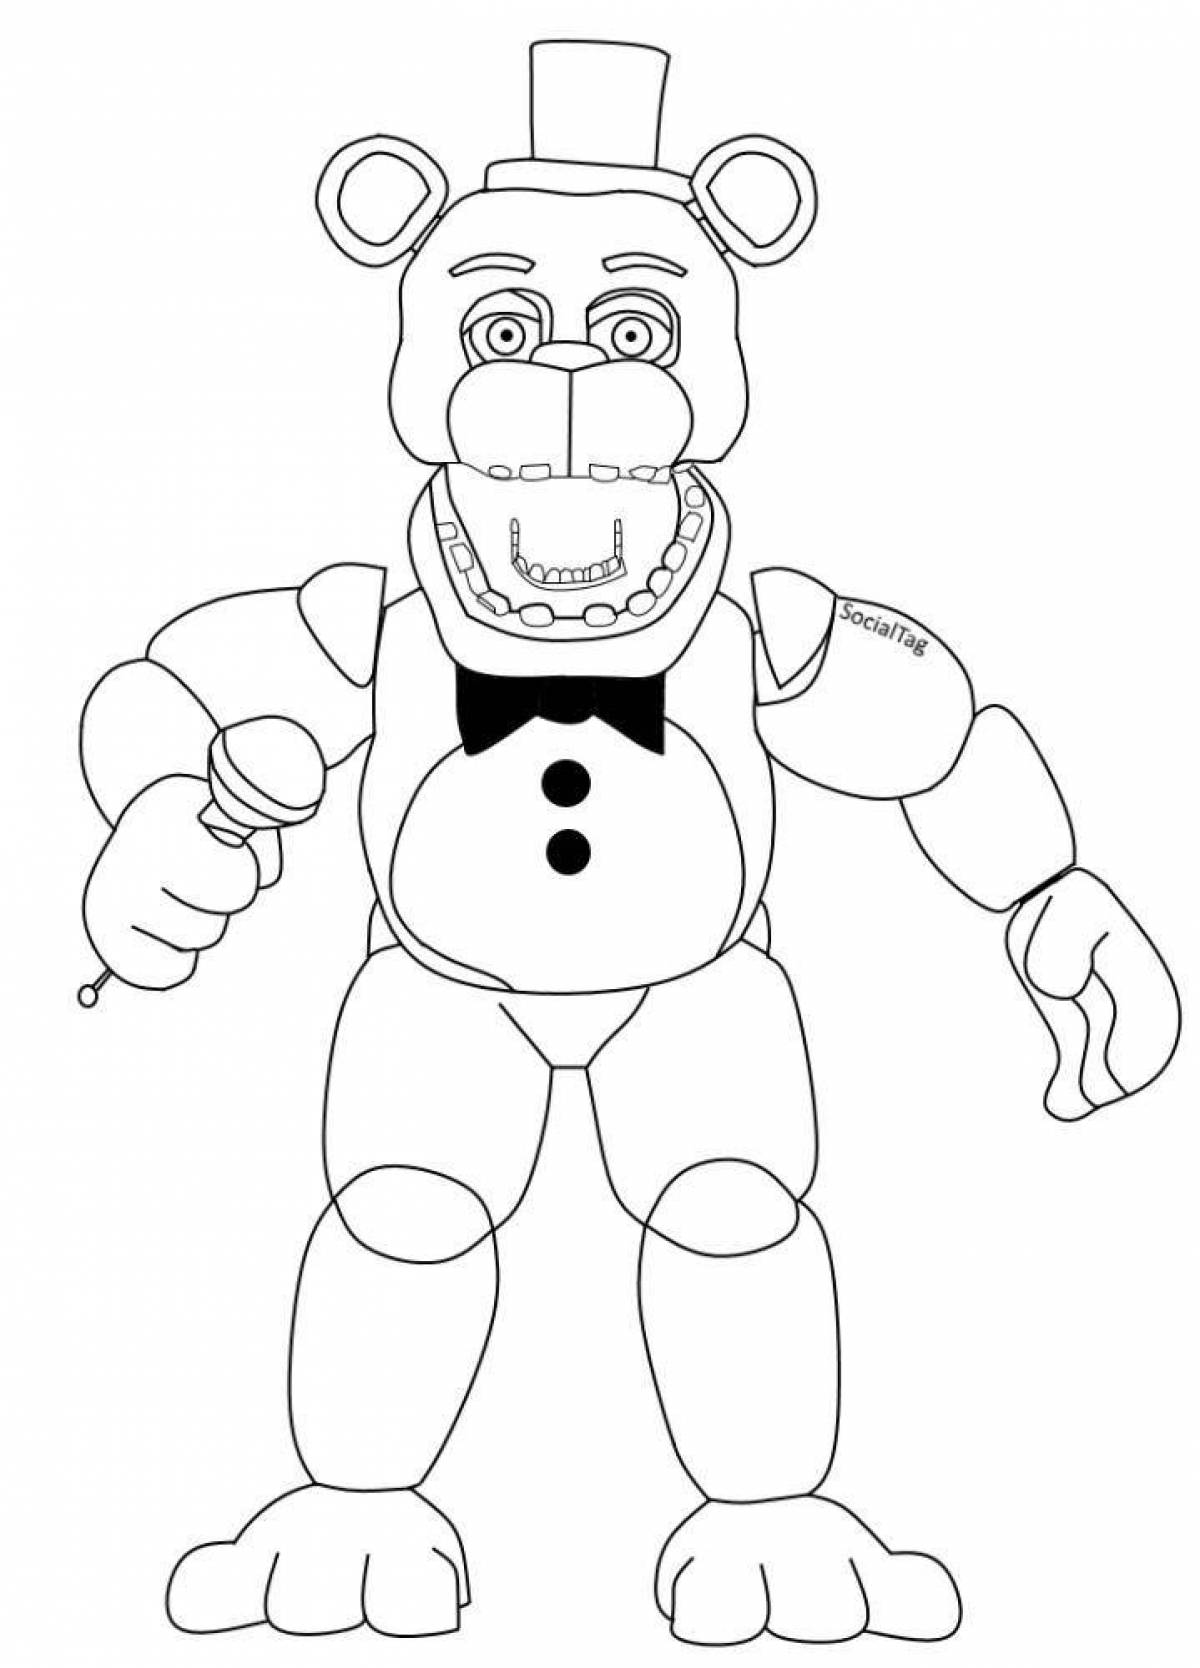 Monty's playful animatronic coloring book